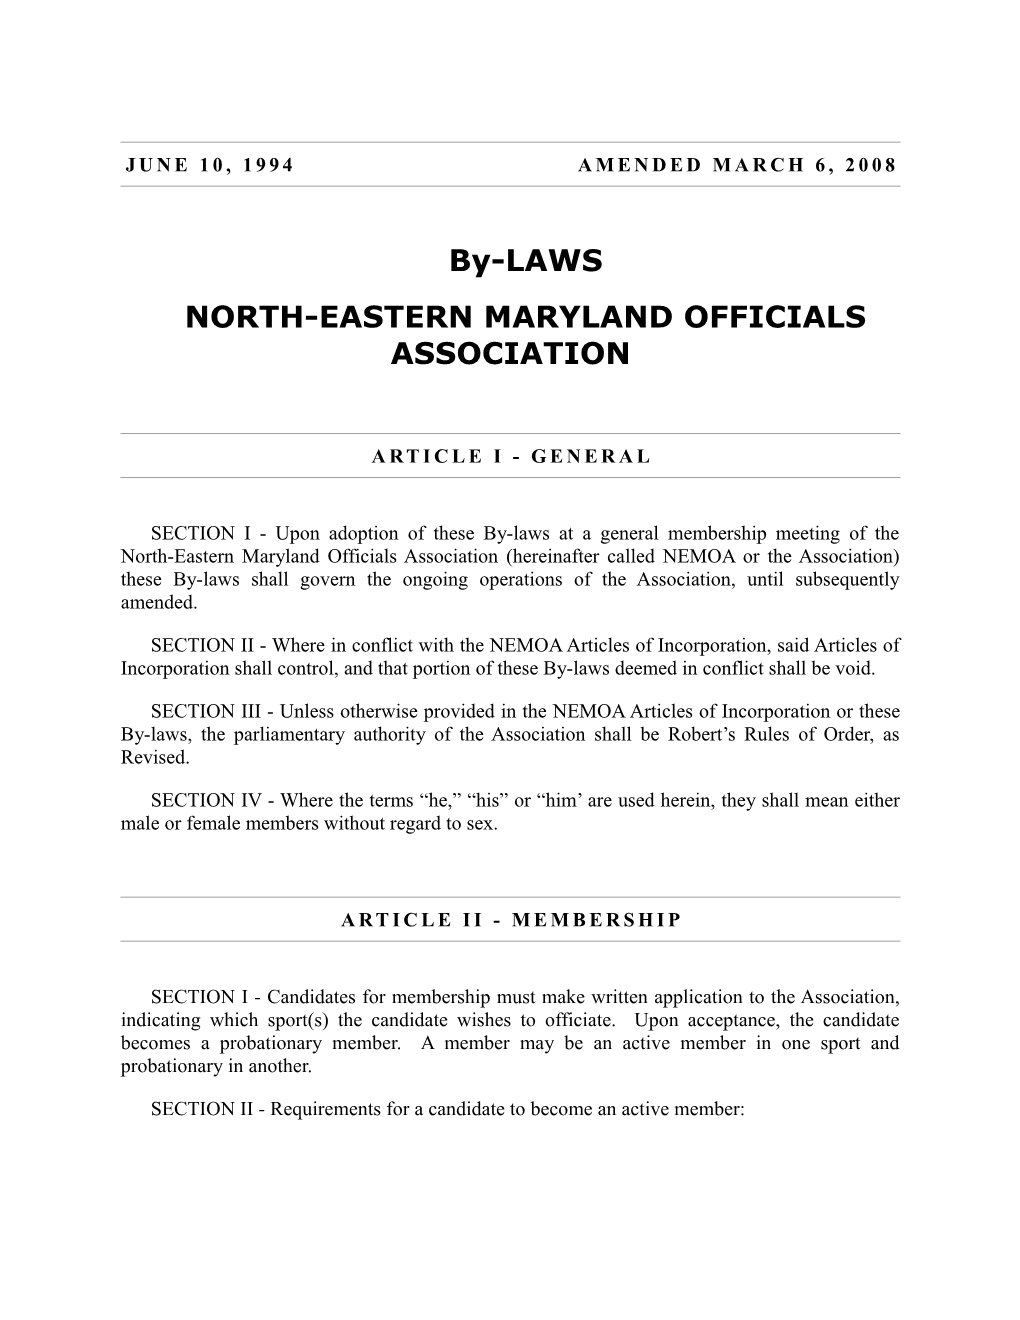 North-Eastern Maryland Officials Association